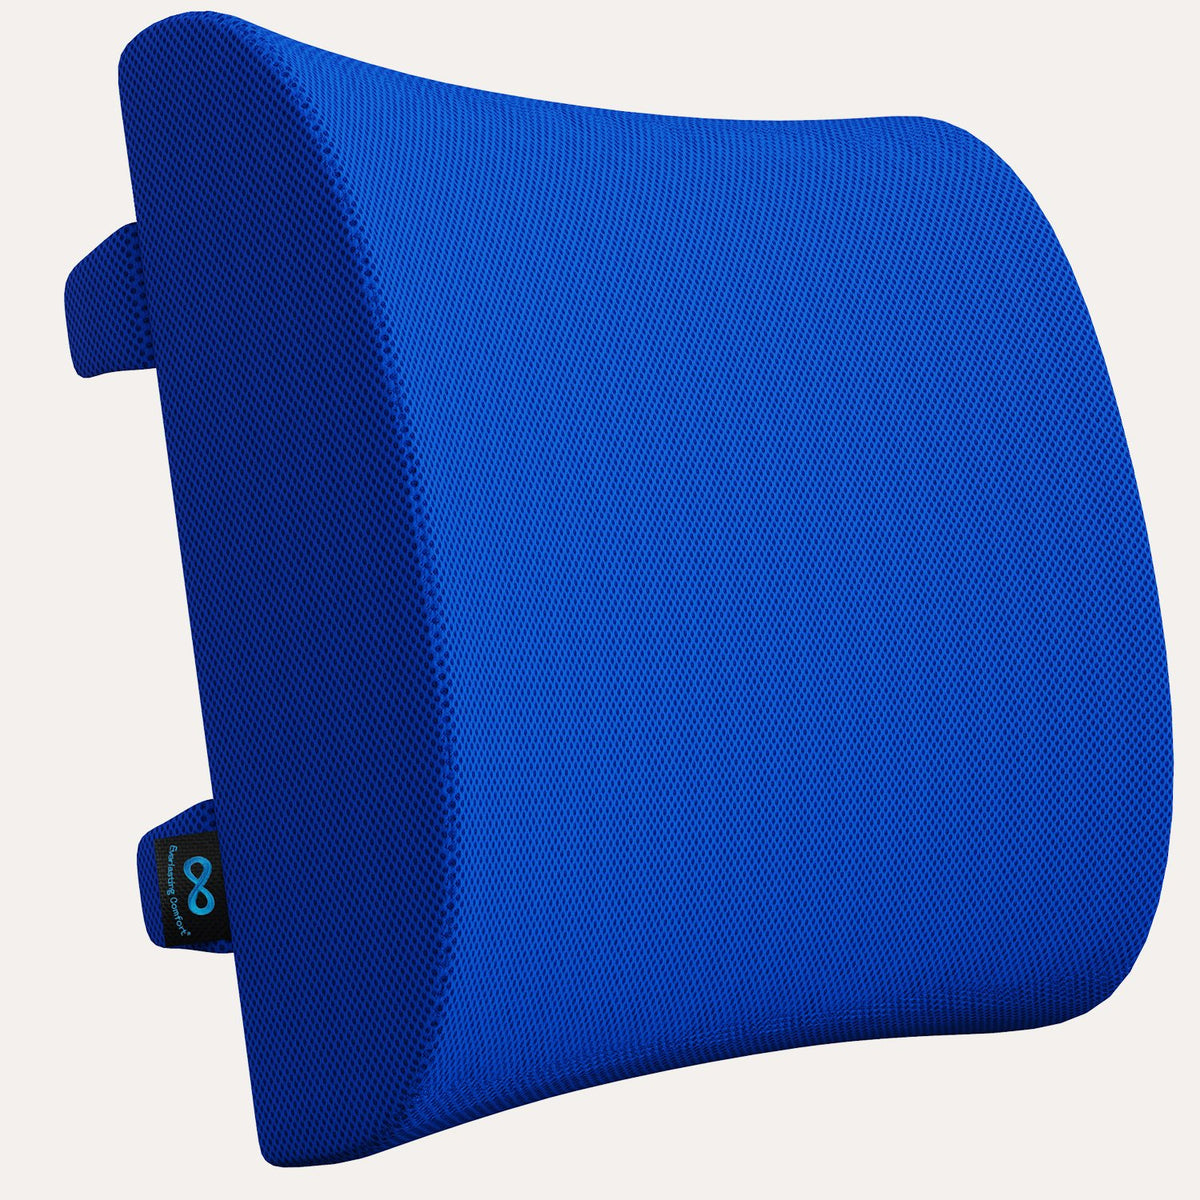 Orthopedic Car Lumbar Support Back Support Cushion for Lower Back